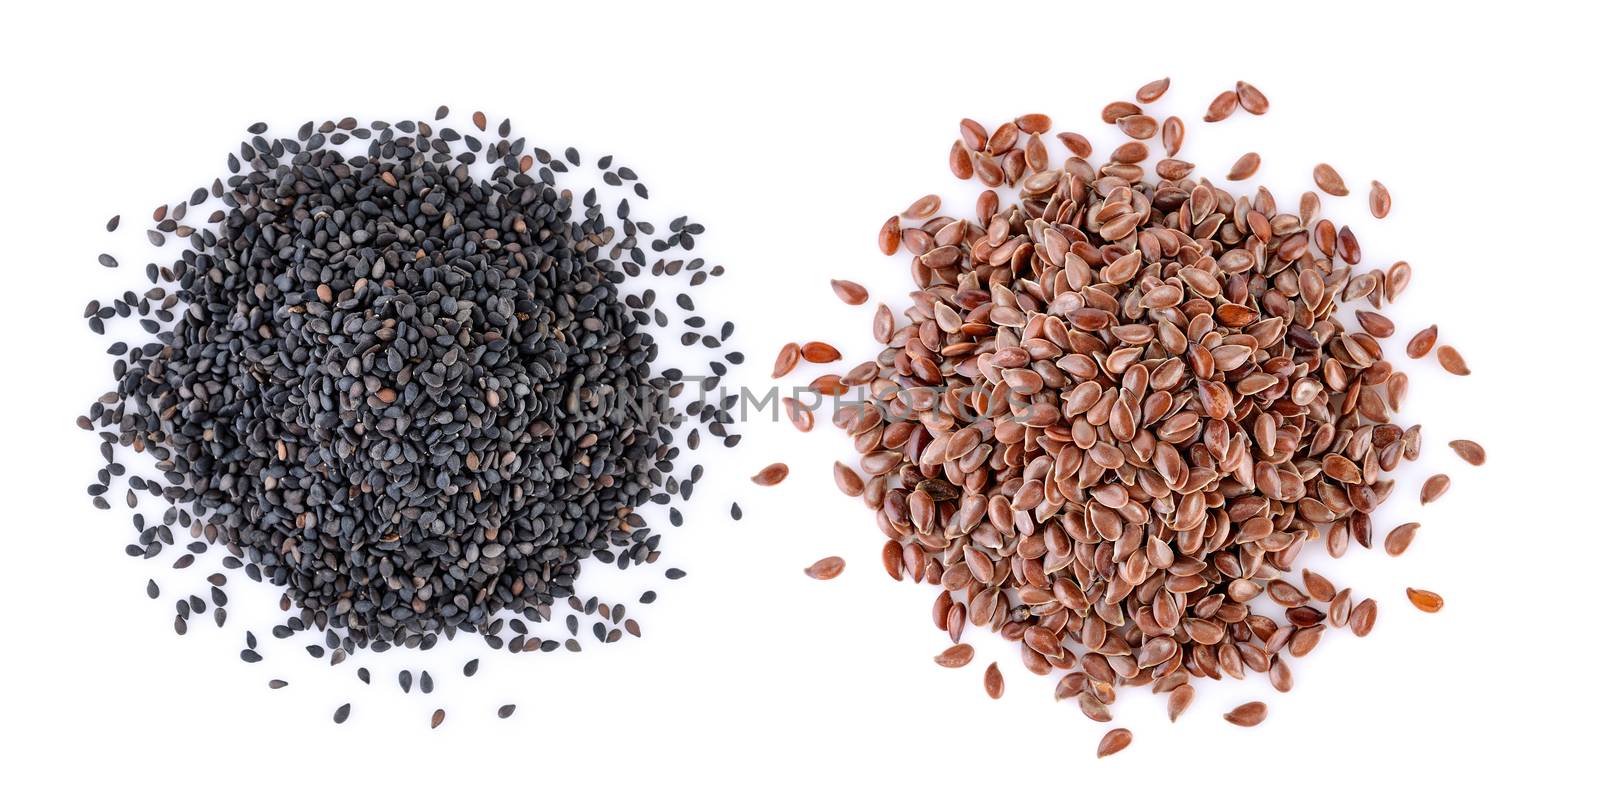 sesame and Flax seeds heap on white background by sommai